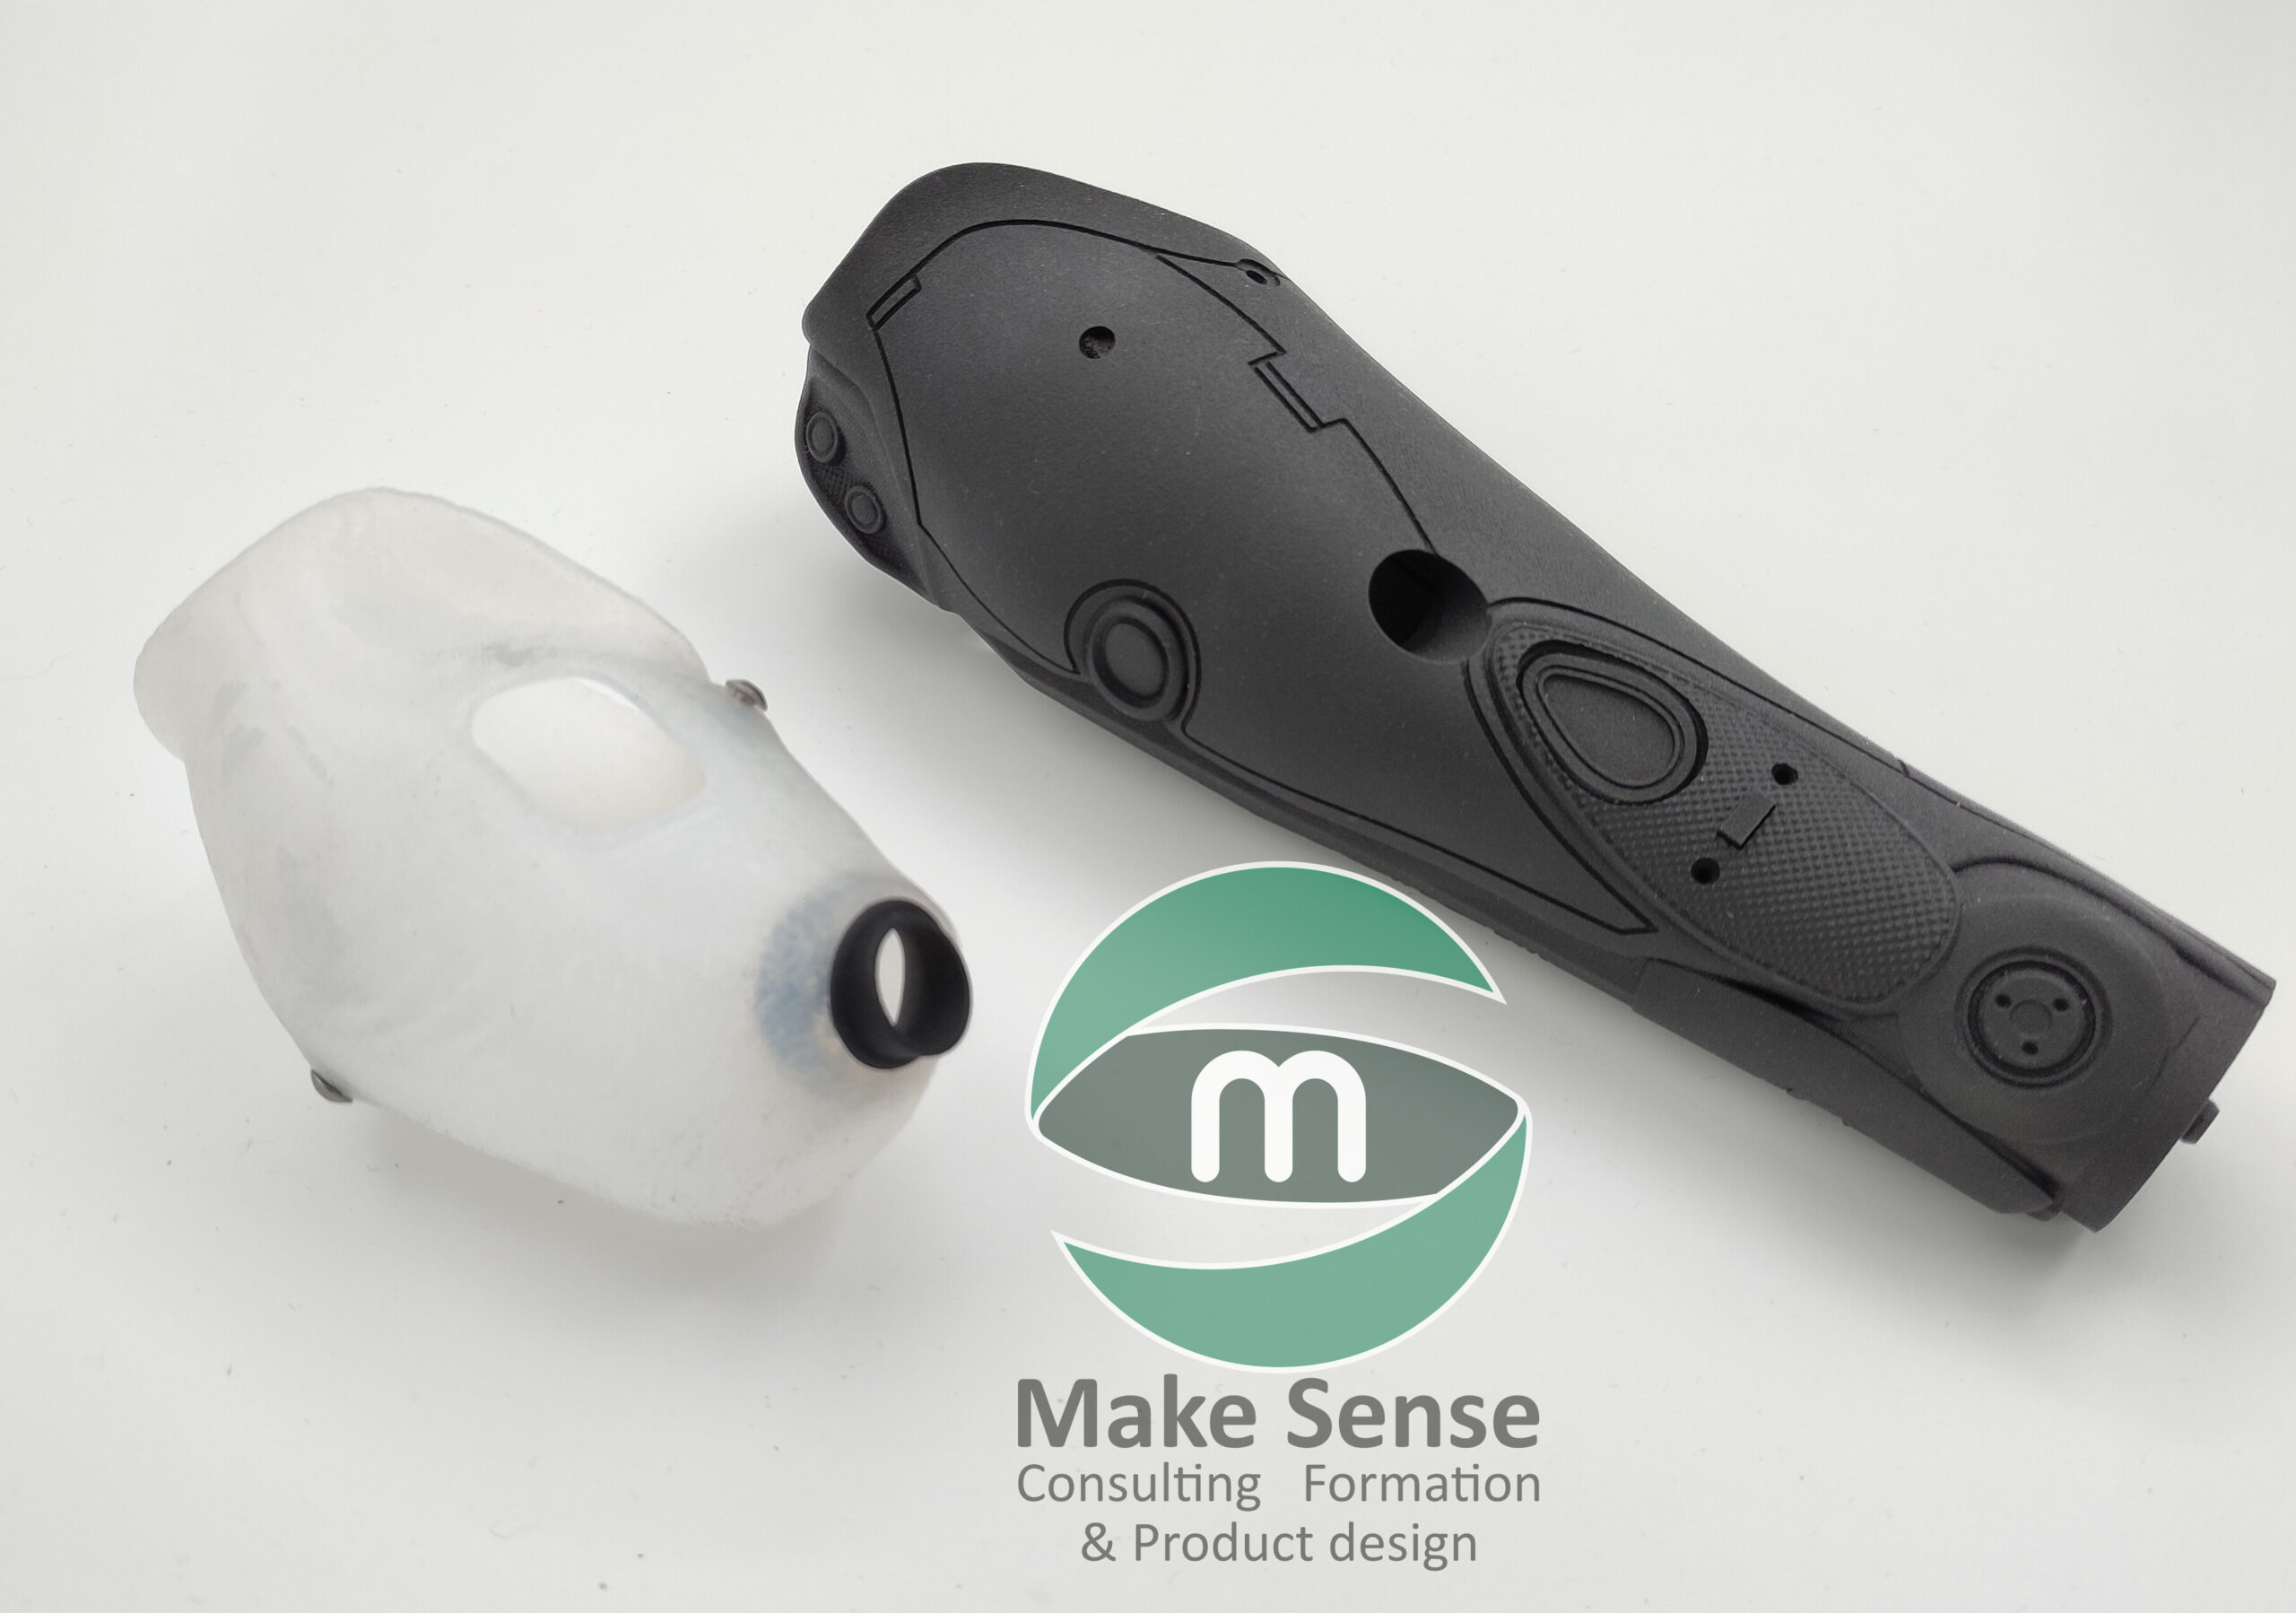 Mechatronic prosthesis by Make Sense and 3D printed socket